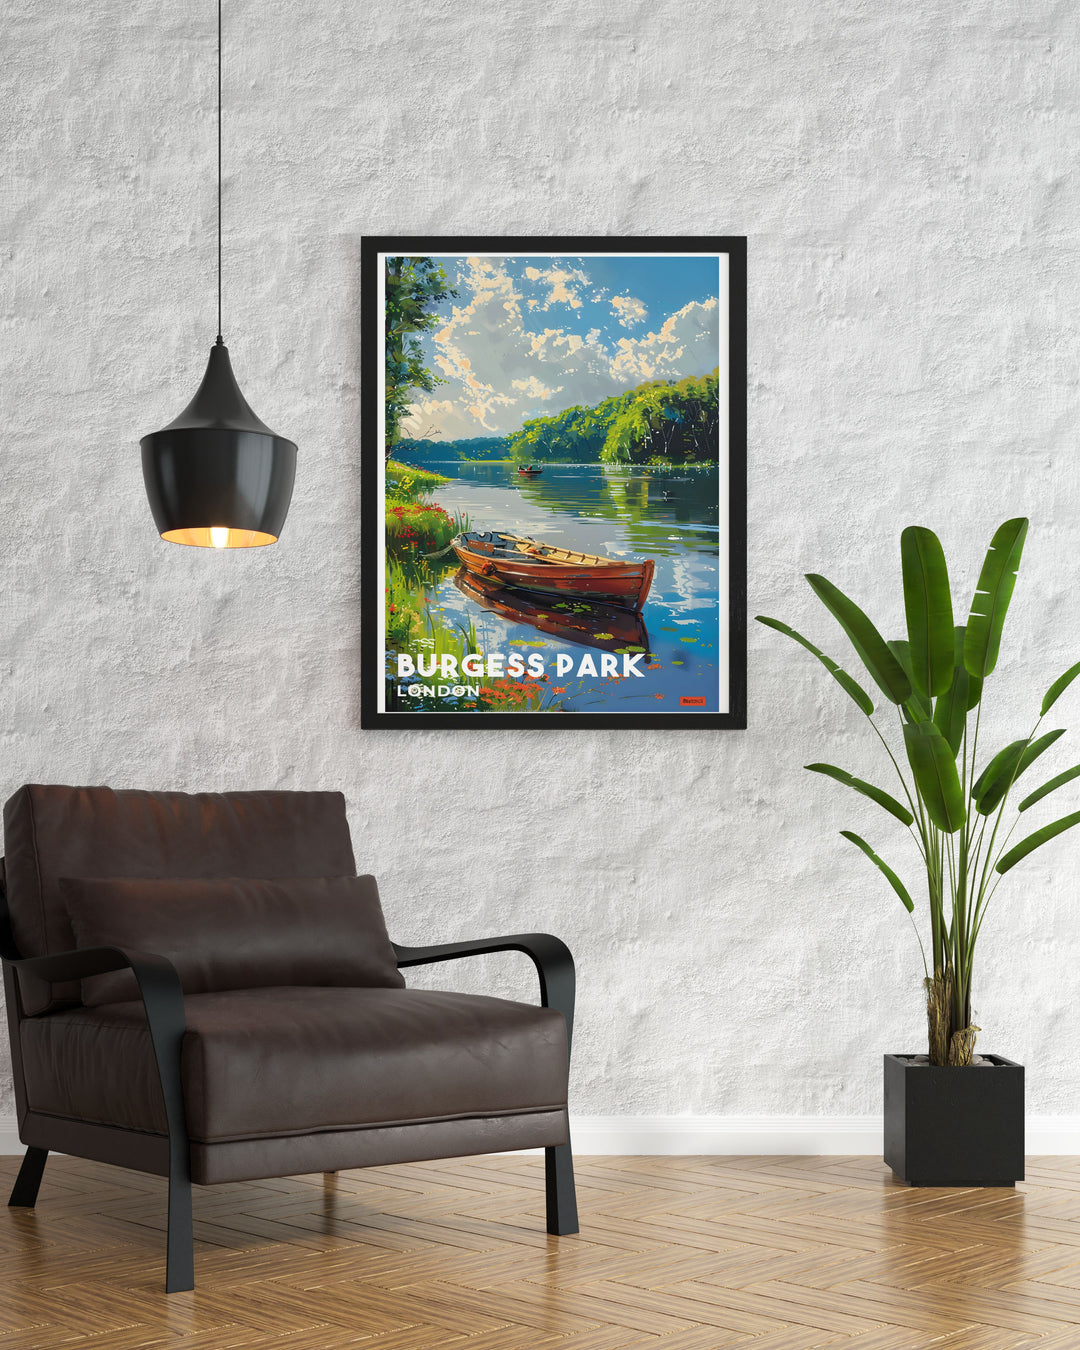 Vintage inspired poster of Burgess Park in London, highlighting the serene lake and green spaces that offer a peaceful retreat within the city. This artwork blends nostalgic charm with contemporary design, ideal for enhancing any rooms decor.